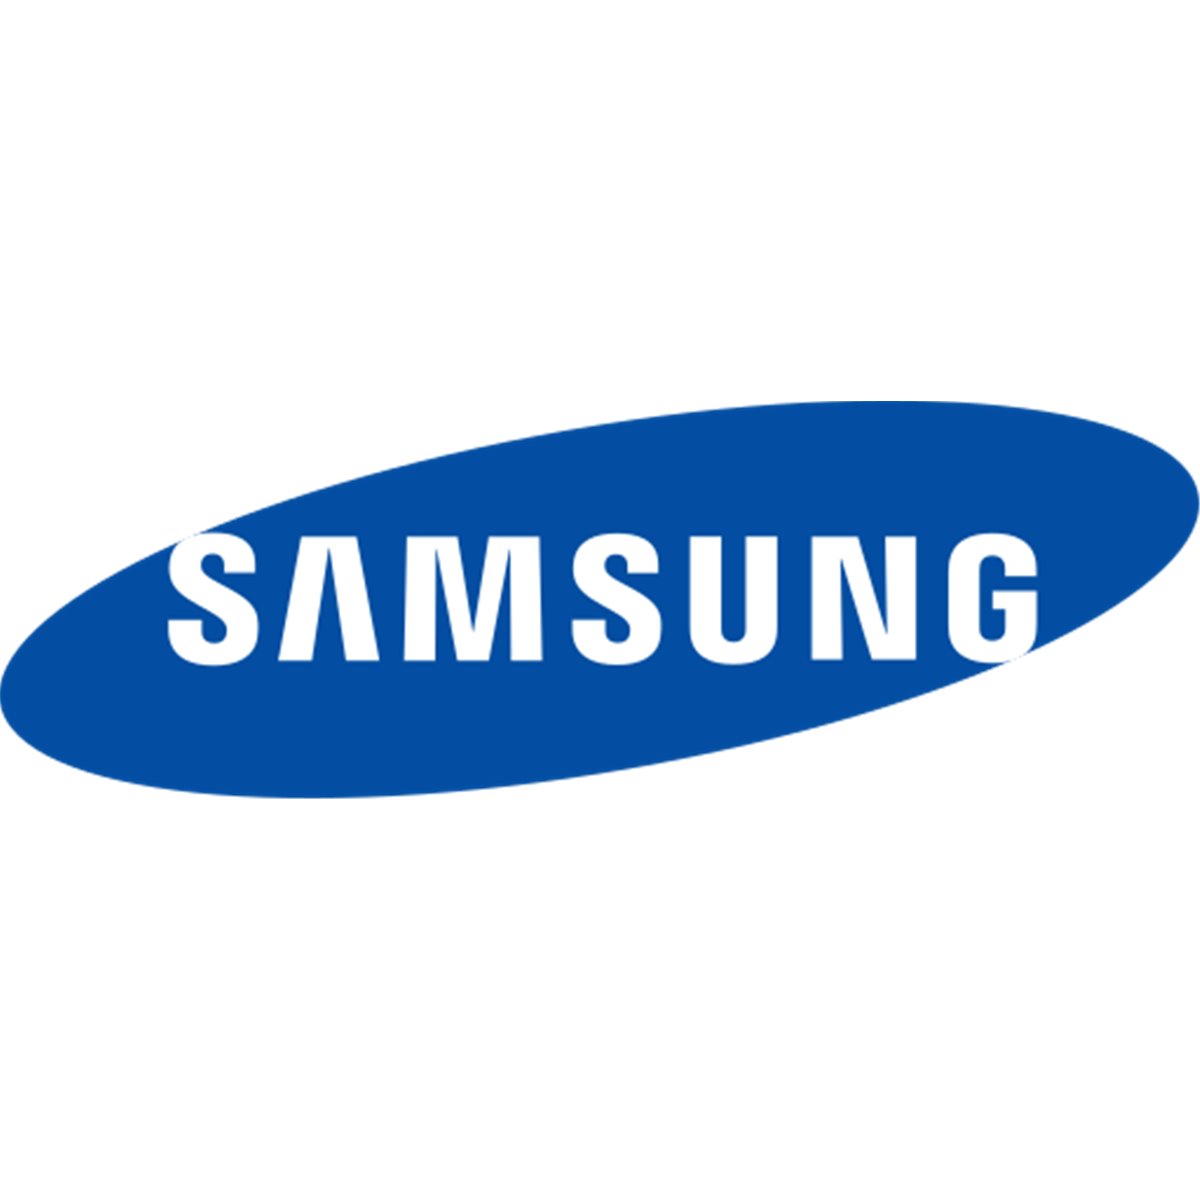 Samsung Clp-r350a OPC drum black and colour standard capacity 20.000 pages - 20,000 sheet